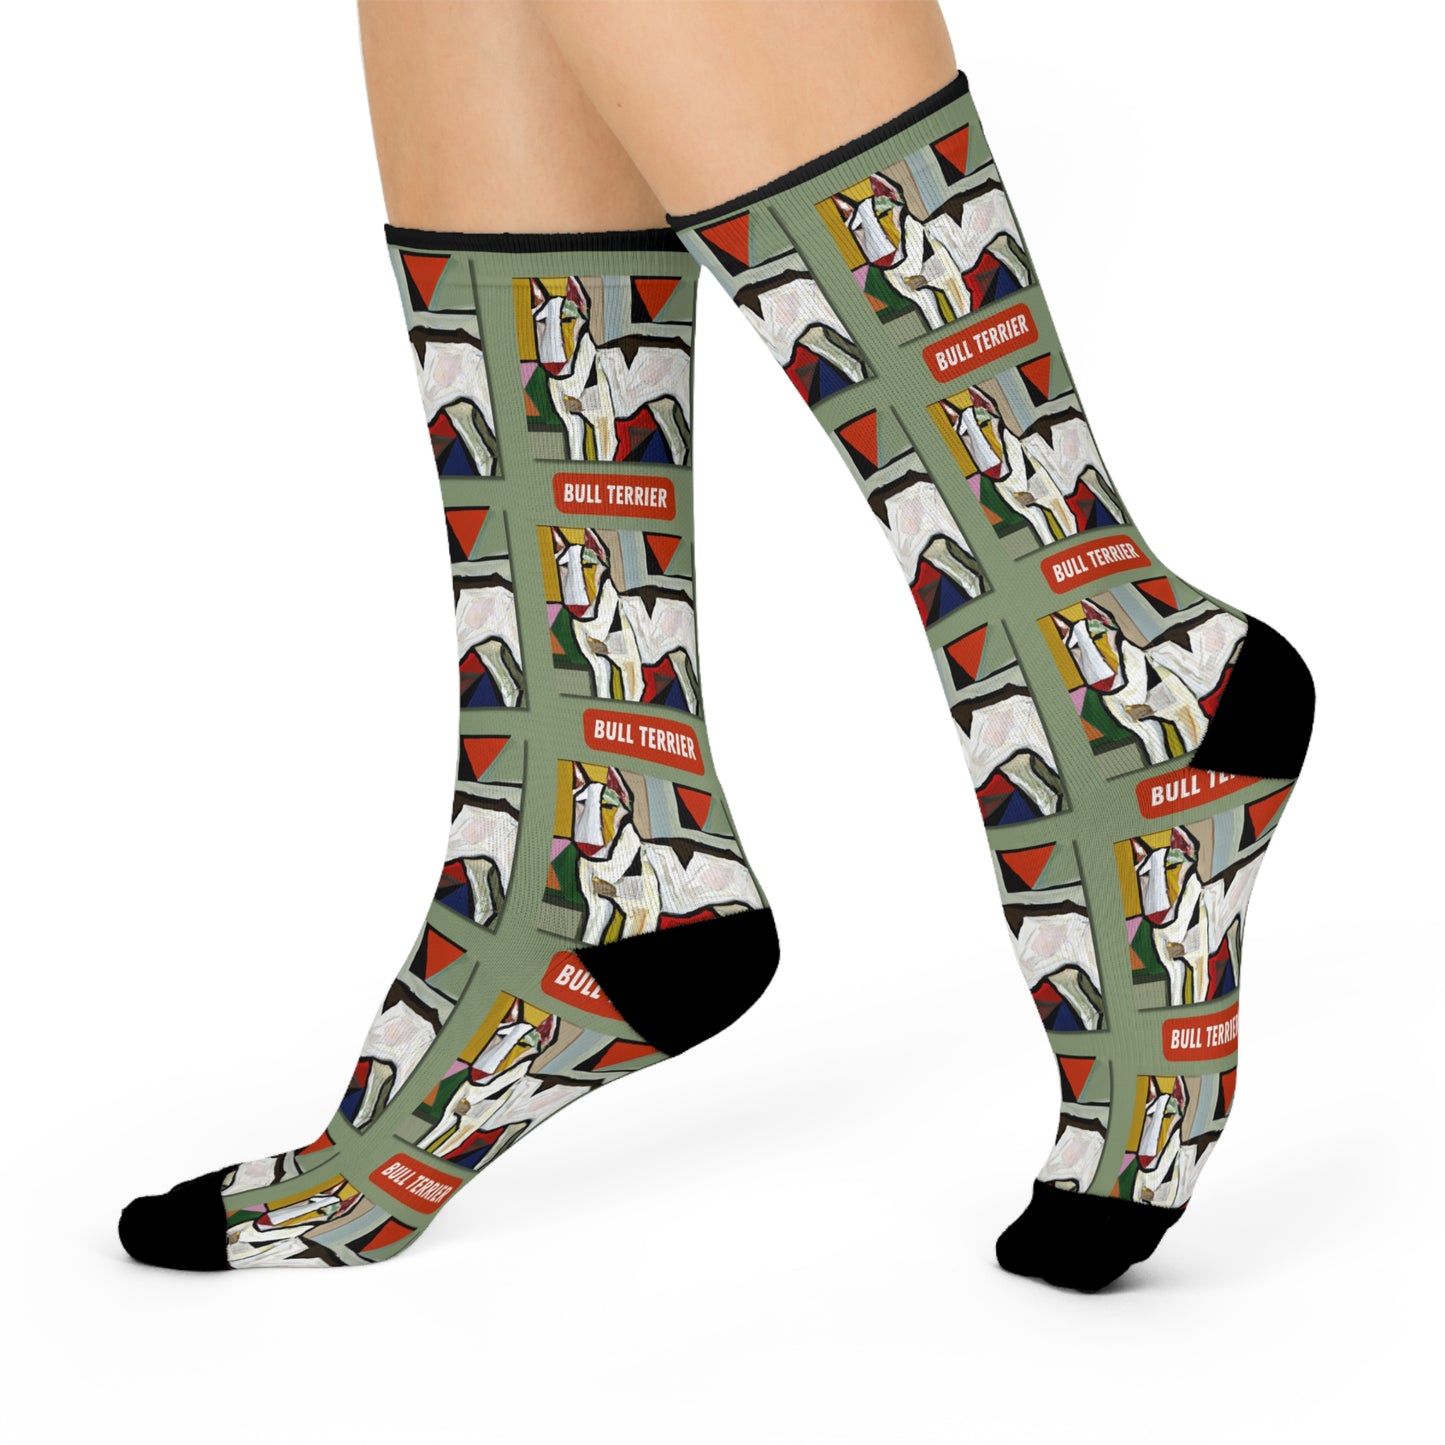 Bull Terrier Socks Picasso Style Unisex Adult Stretchy Mid Calf Original